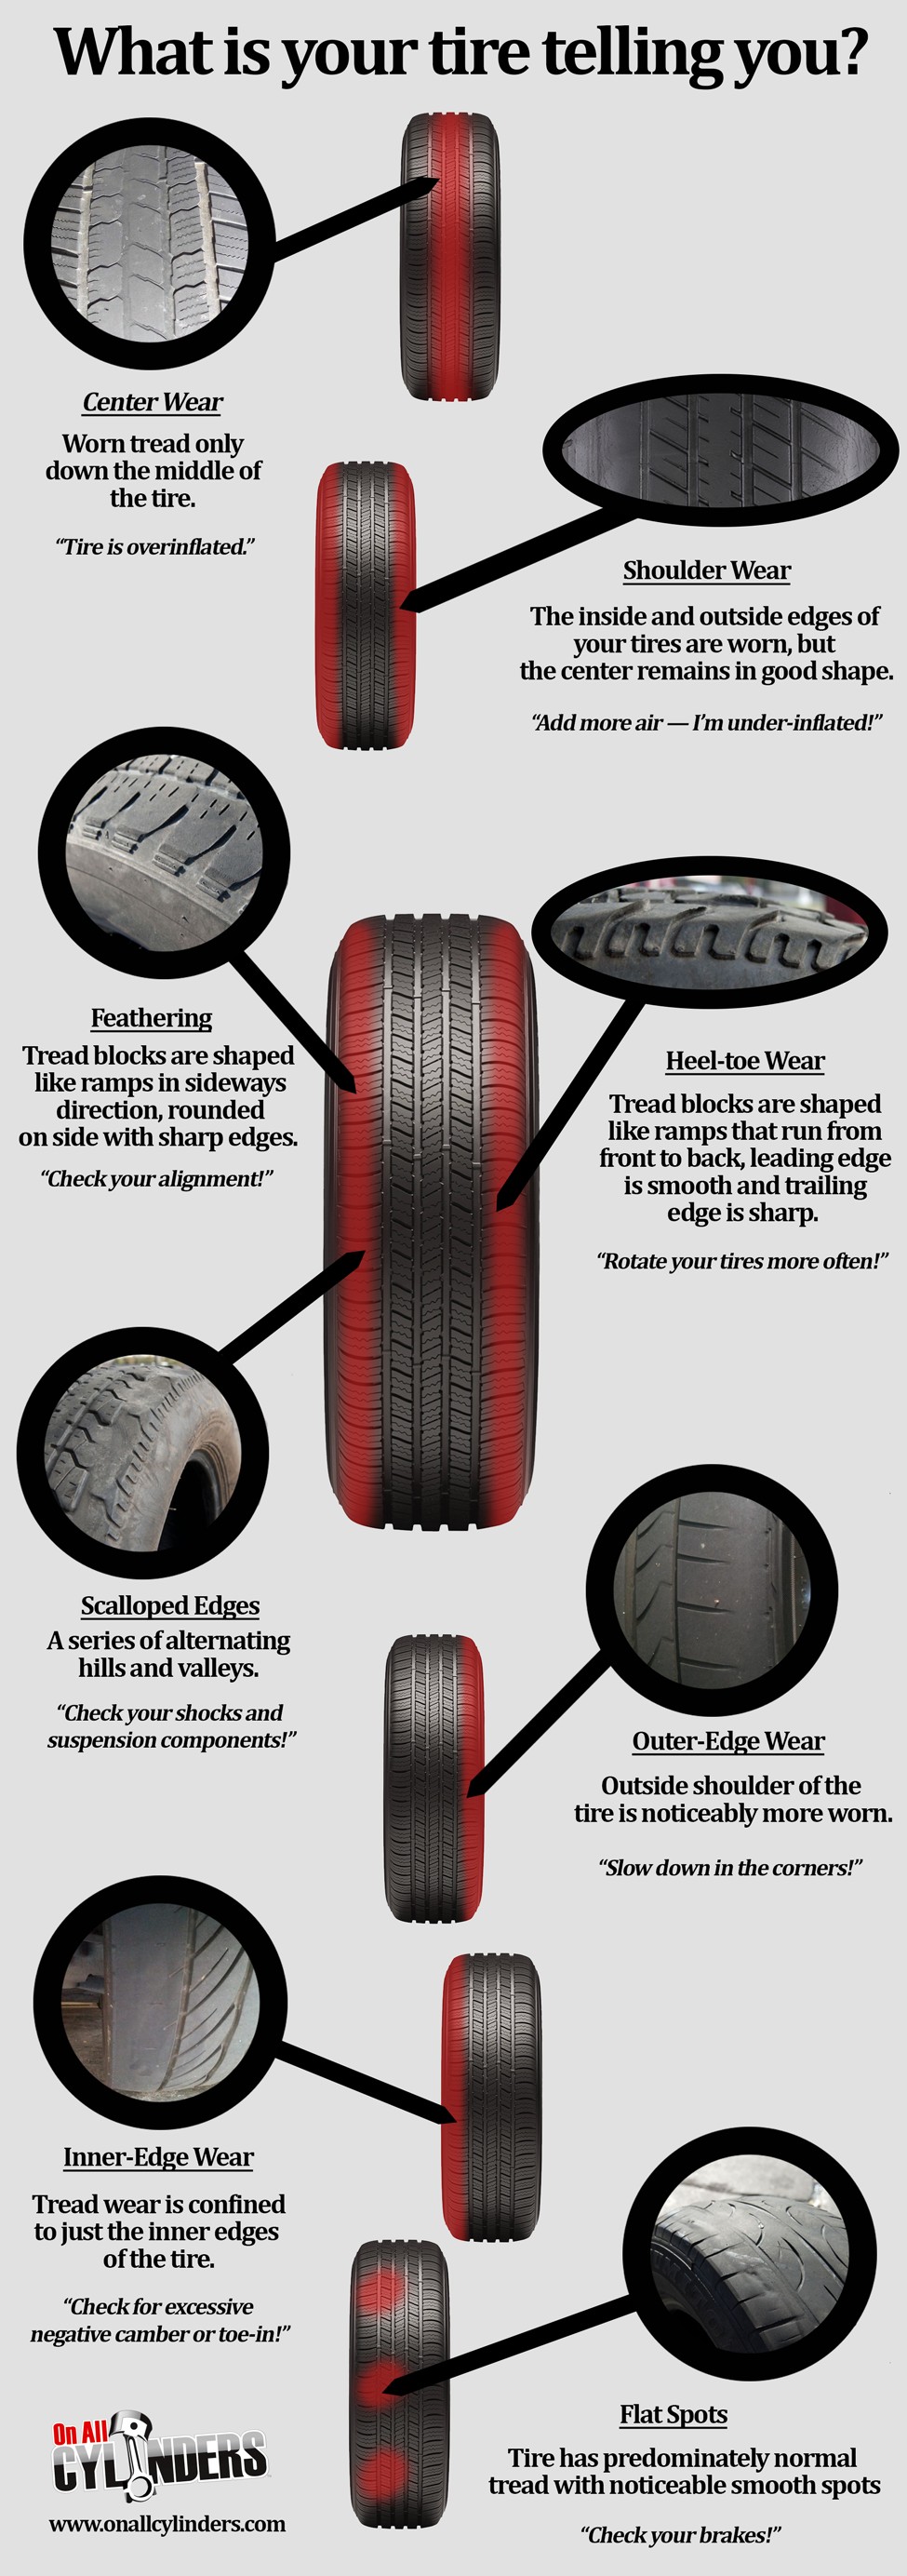 Car Tyre Rotation Diagram Tire Tread Wear Es In Many forms the Wear Pattern On Your Tires Of Car Tyre Rotation Diagram